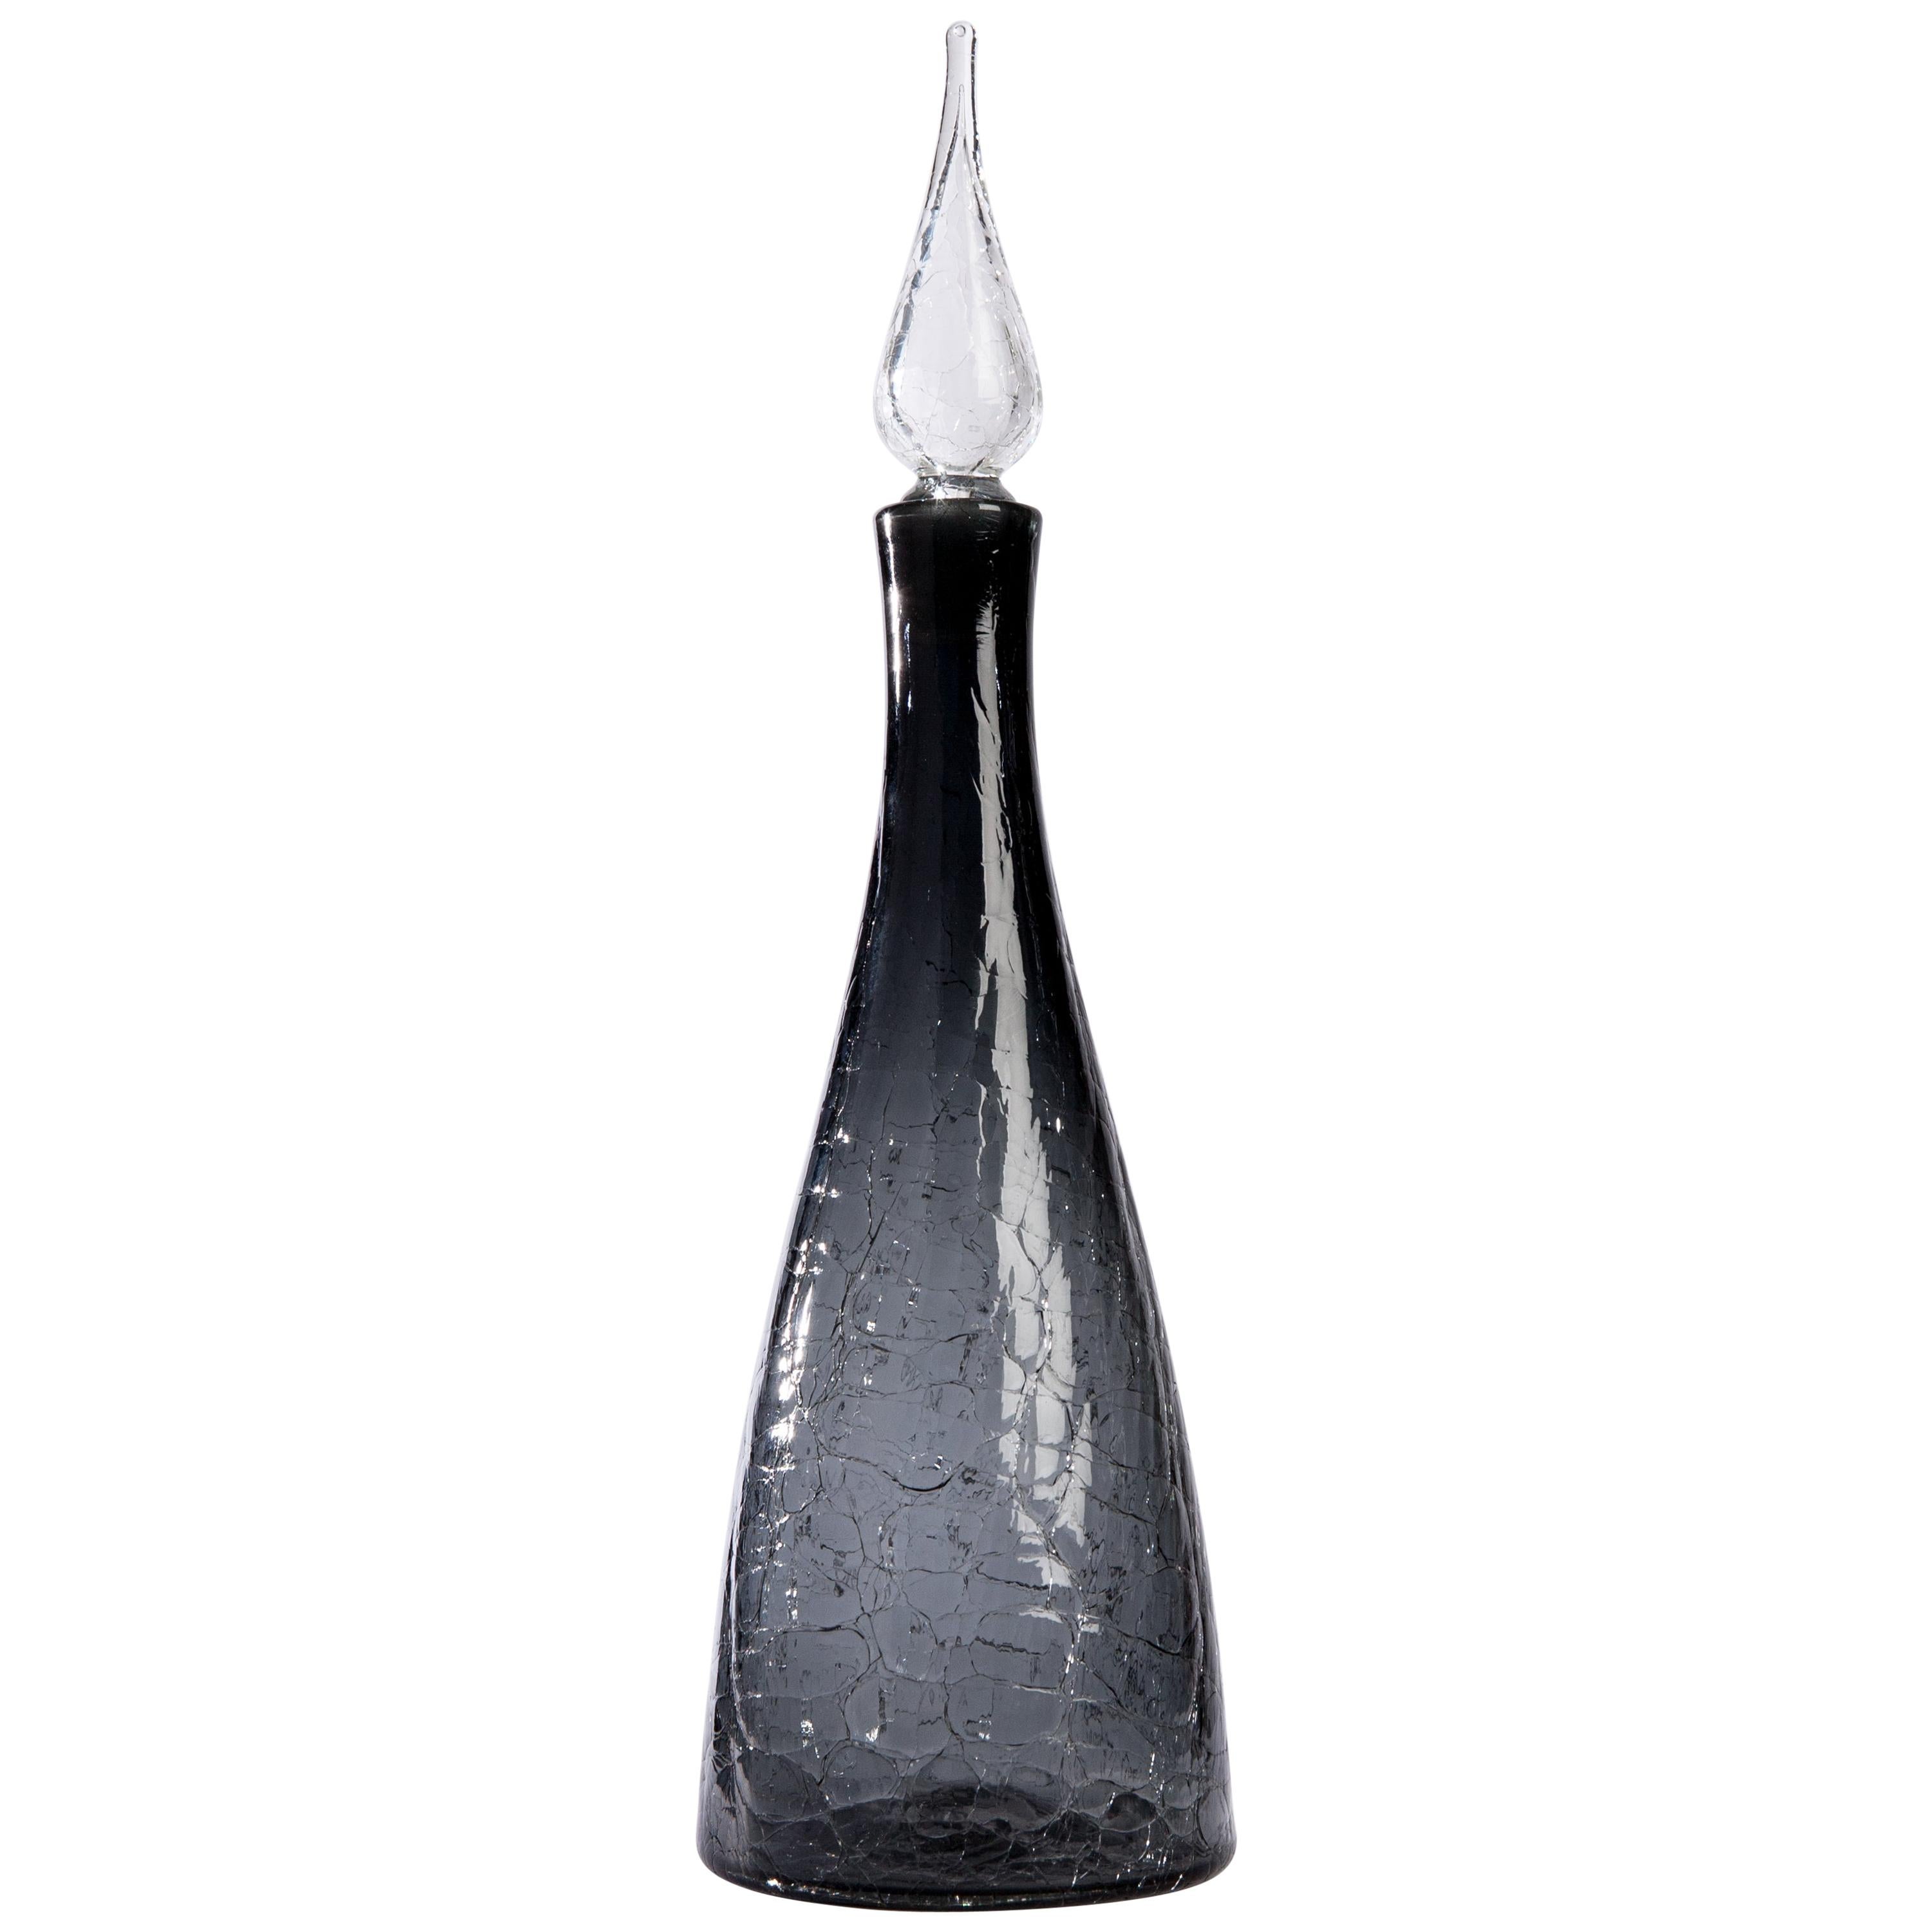 Midcentury Blenko Charcoal Grey Crackle Glass Decanter with Stopper, Circa 1950 For Sale